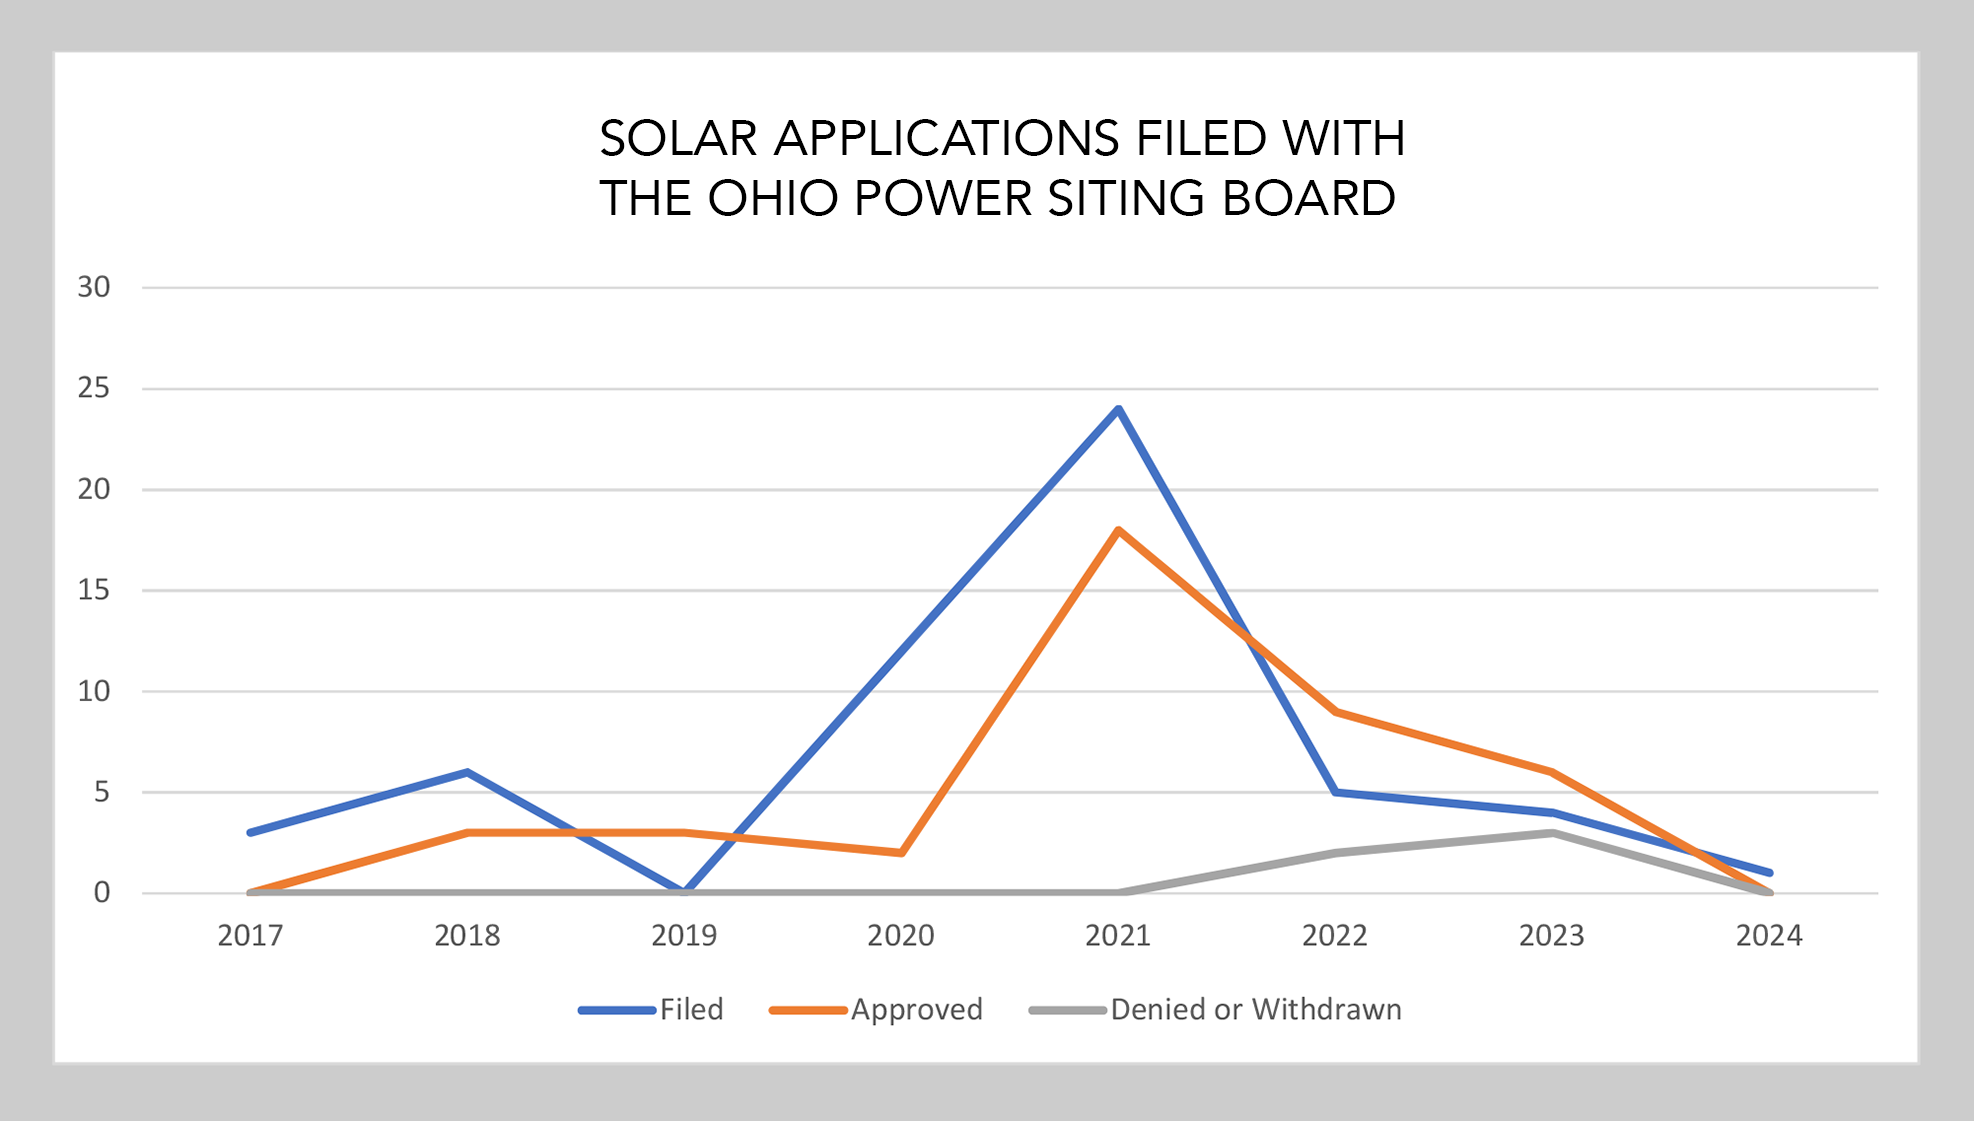 A line graph showing data from 2017-2024 of filed, approved and denied/withdrawn applications with the Ohio Power Siting Board.